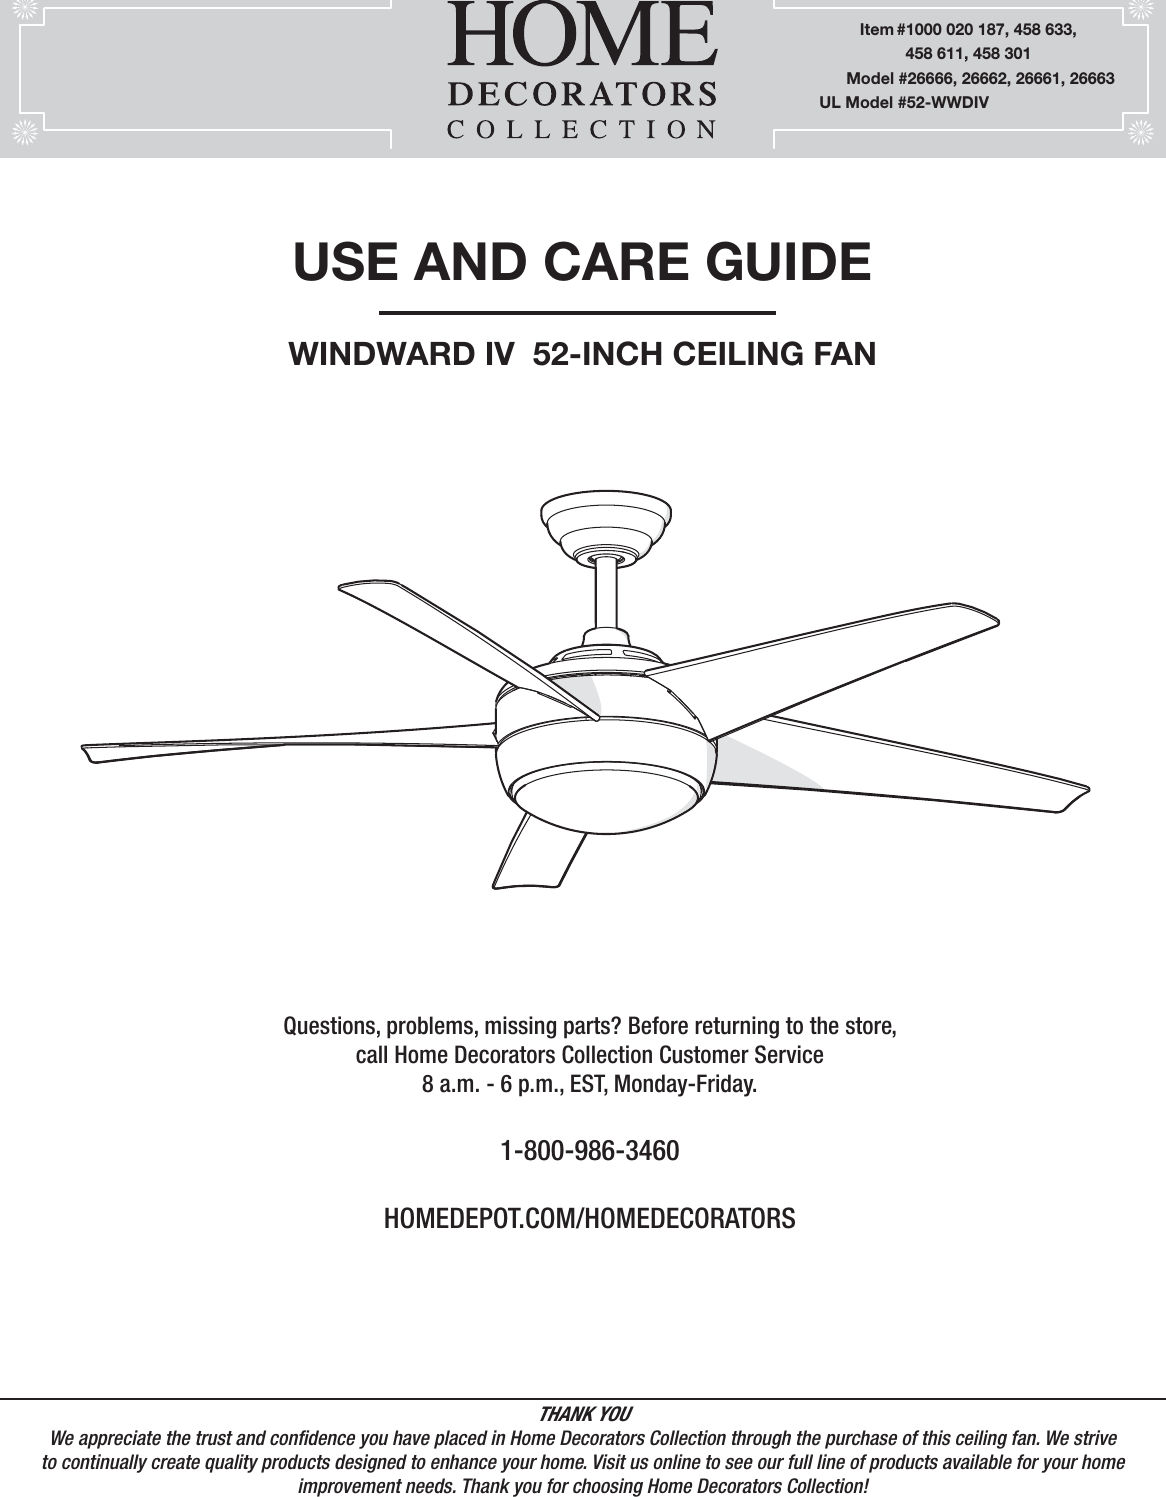 USE AND CARE GUIDEWINDWARD IV  52-INCH CEILING FANQuestions, problems, missing parts? Before returning to the store,call Home Decorators Collection Customer Service8 a.m. - 6 p.m., EST, Monday-Friday.1-800-986-3460HOMEDEPOT.COM/HOMEDECORATORSTHANK YOUWe appreciate the trust and condence you have placed in Home Decorators Collection through the purchase of this ceiling fan. We strive to continually create quality products designed to enhance your home. Visit us online to see our full line of products available for your home improvement needs. Thank you for choosing Home Decorators Collection!         Item #1000 020 187, 458 633,                    458 611, 458 301      Model #26666, 26662, 26661, 26663UL Model #52-WWDIV